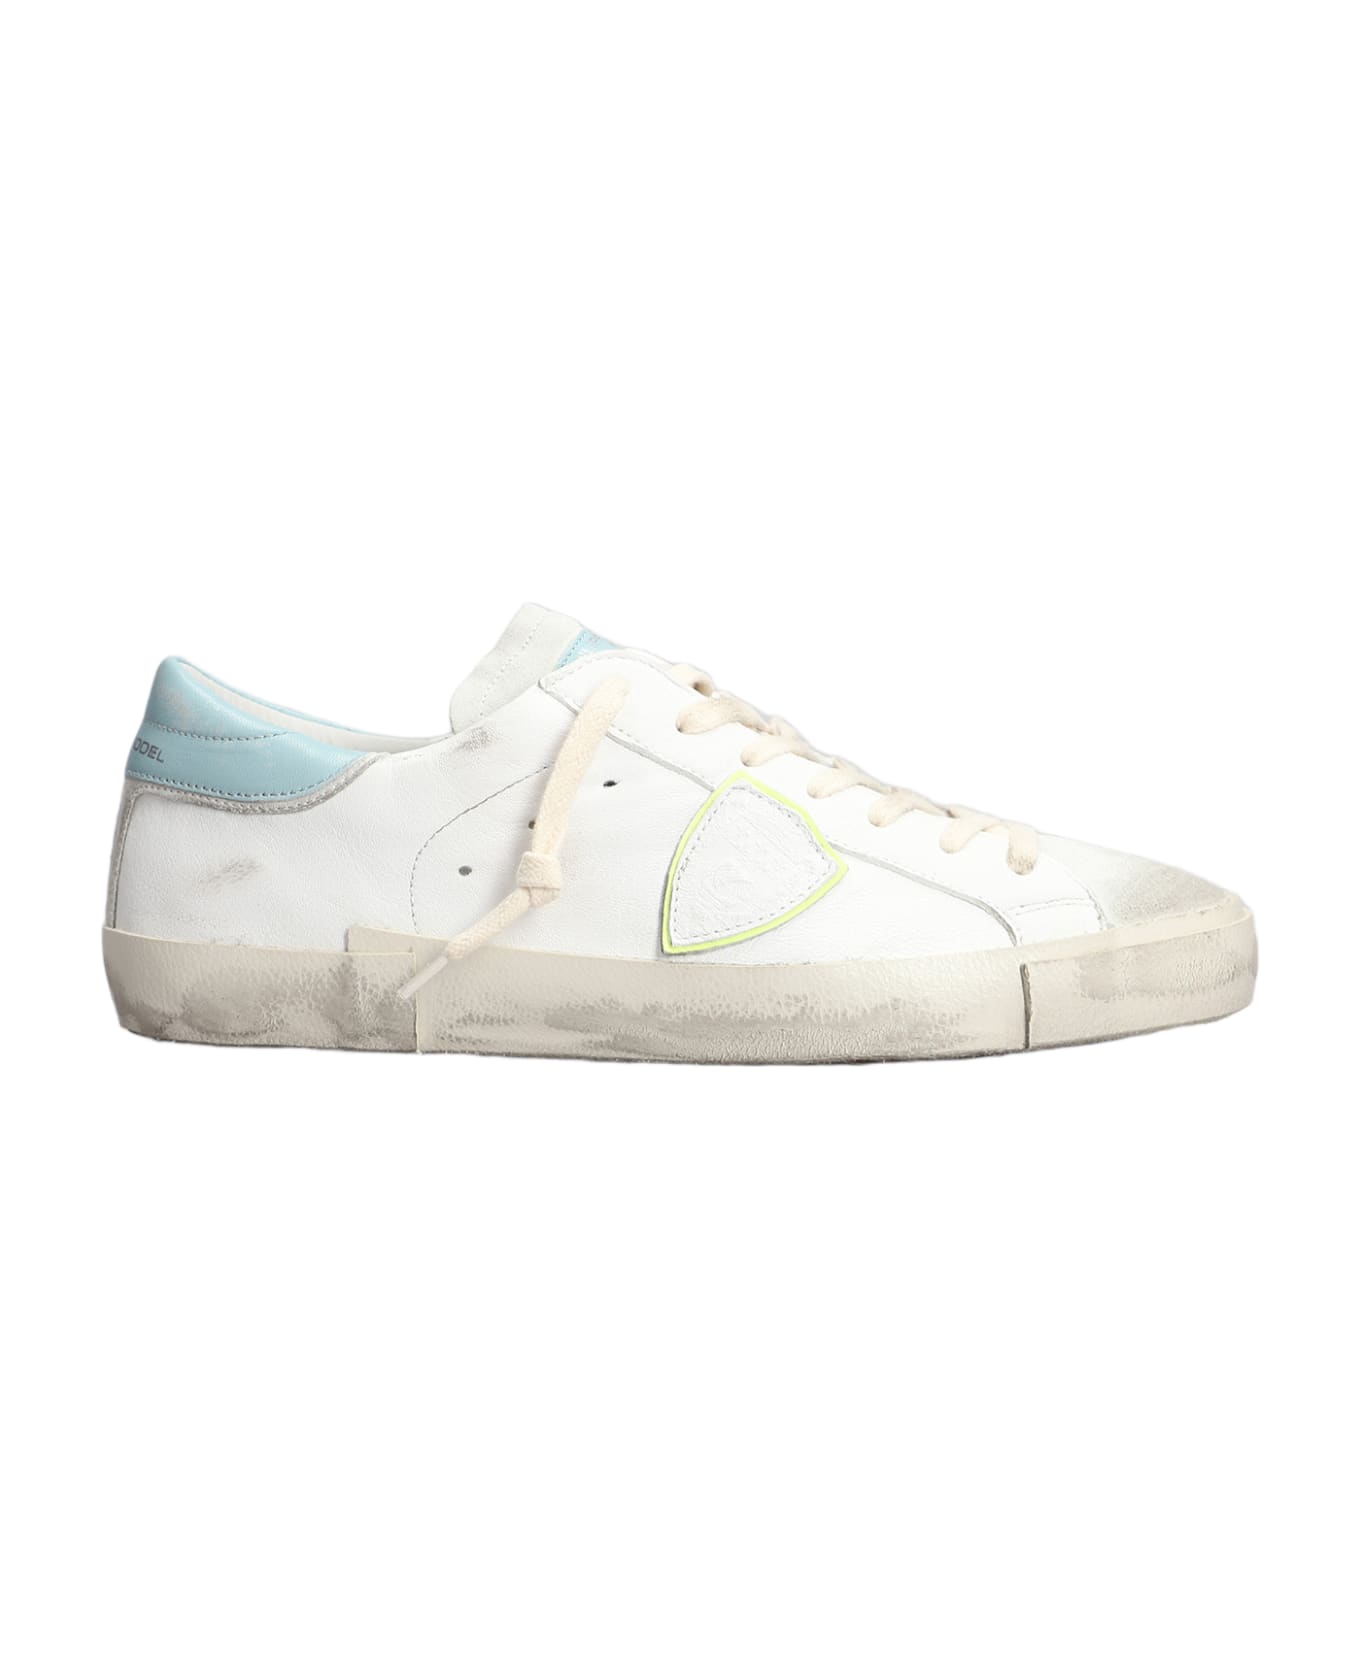 Philippe Model Prsx Low Sneakers In White Suede And Leather - white スニーカー